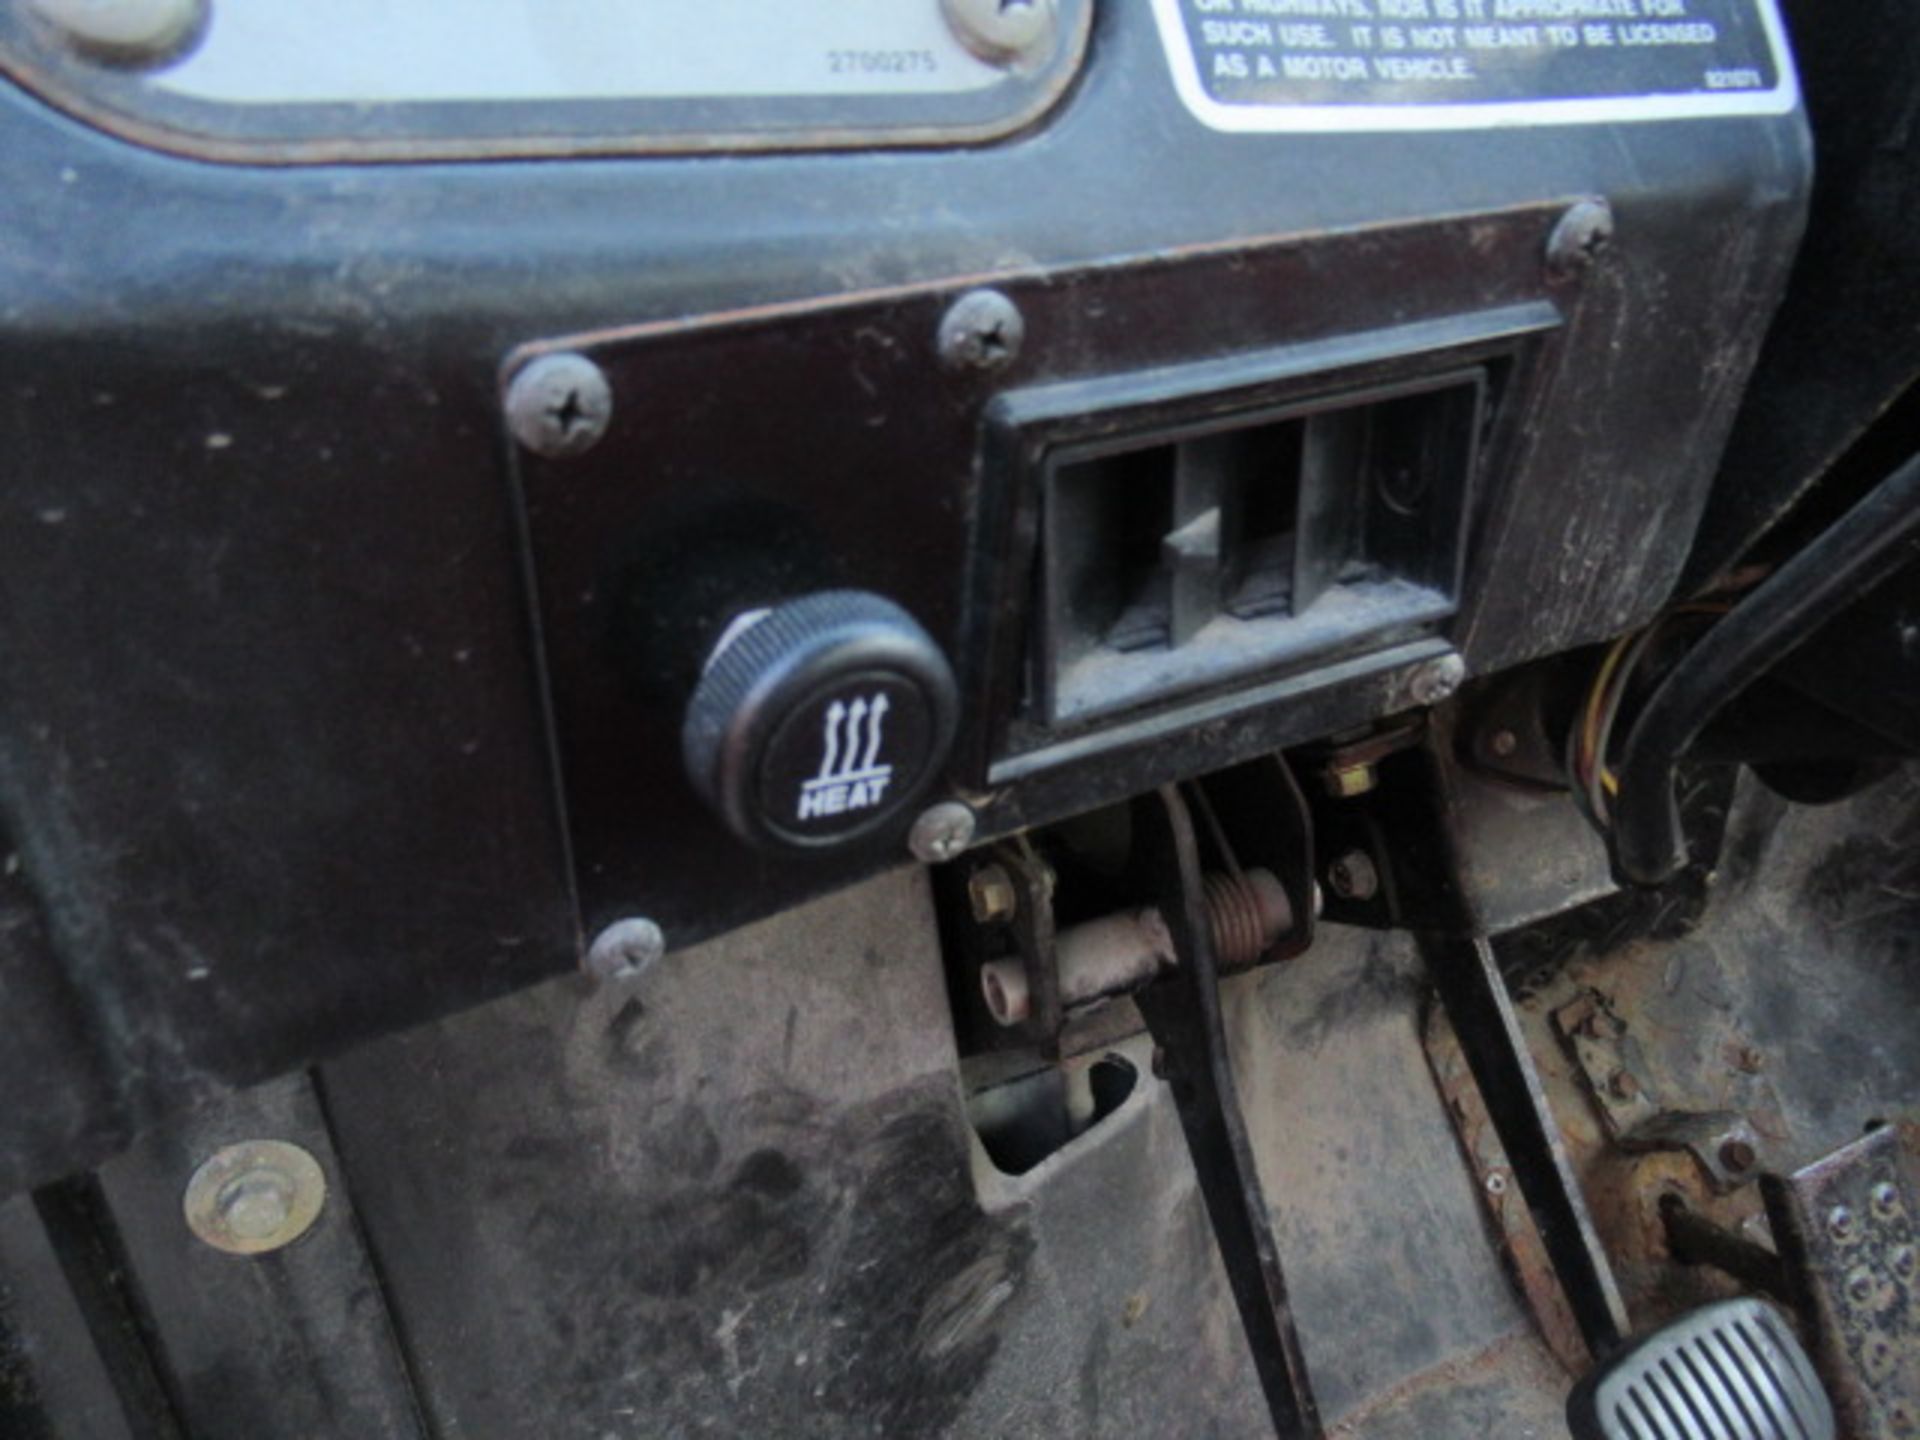 Cushman A130 4 Wheeler, Total Number of Hours = 2008.9, Needs A New Ignition Switch - Image 4 of 7